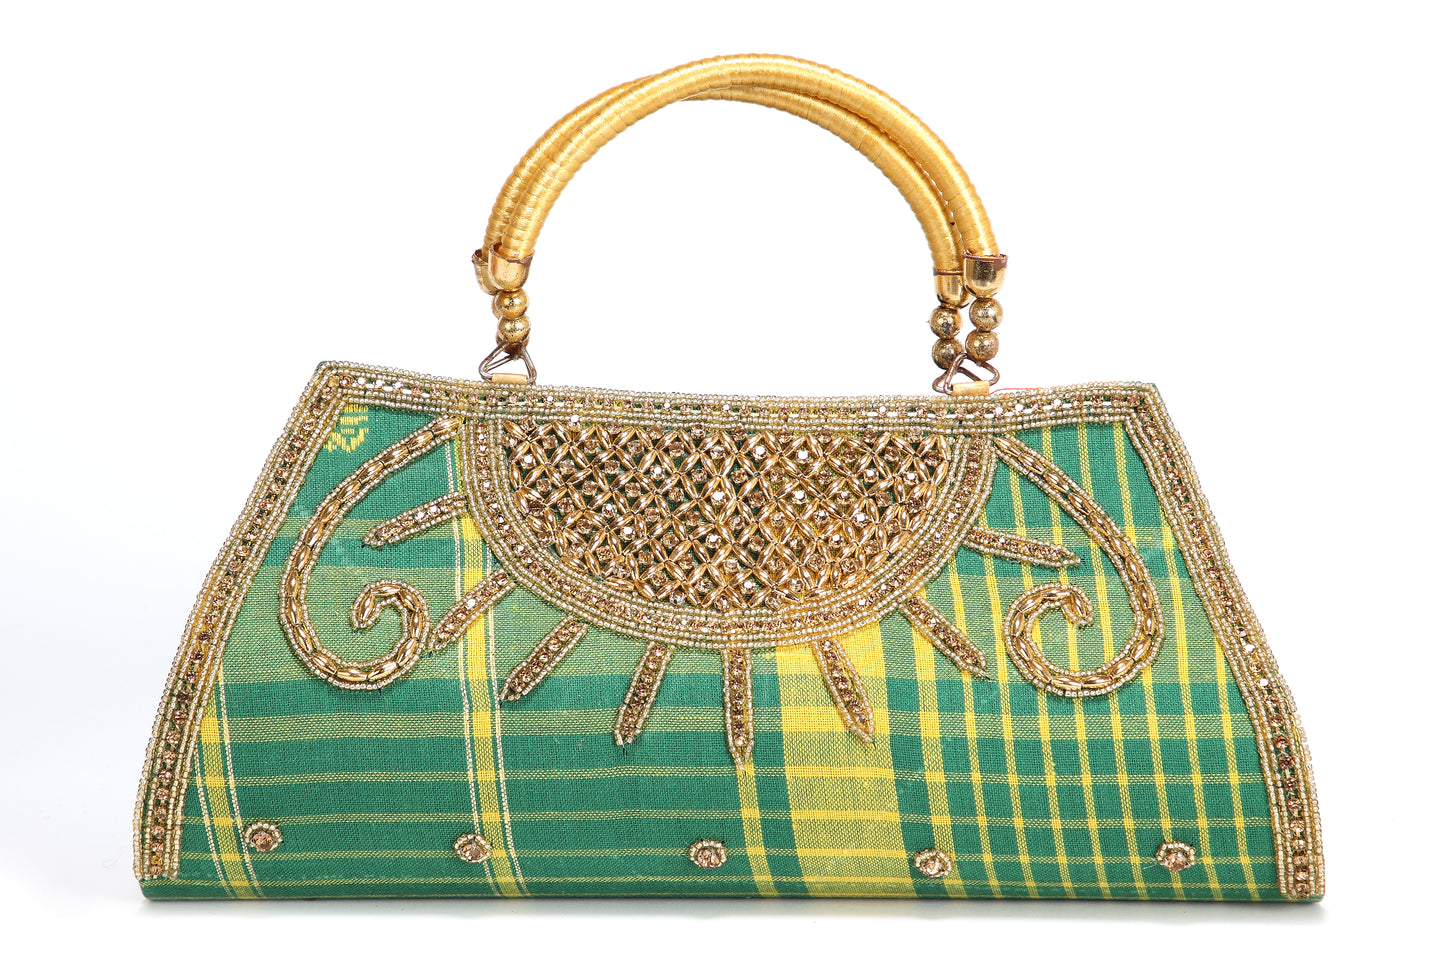 Black and Antique Gold Elle Bridal Clutch Bags in Delhi at best price by  Sensation Exports - Justdial